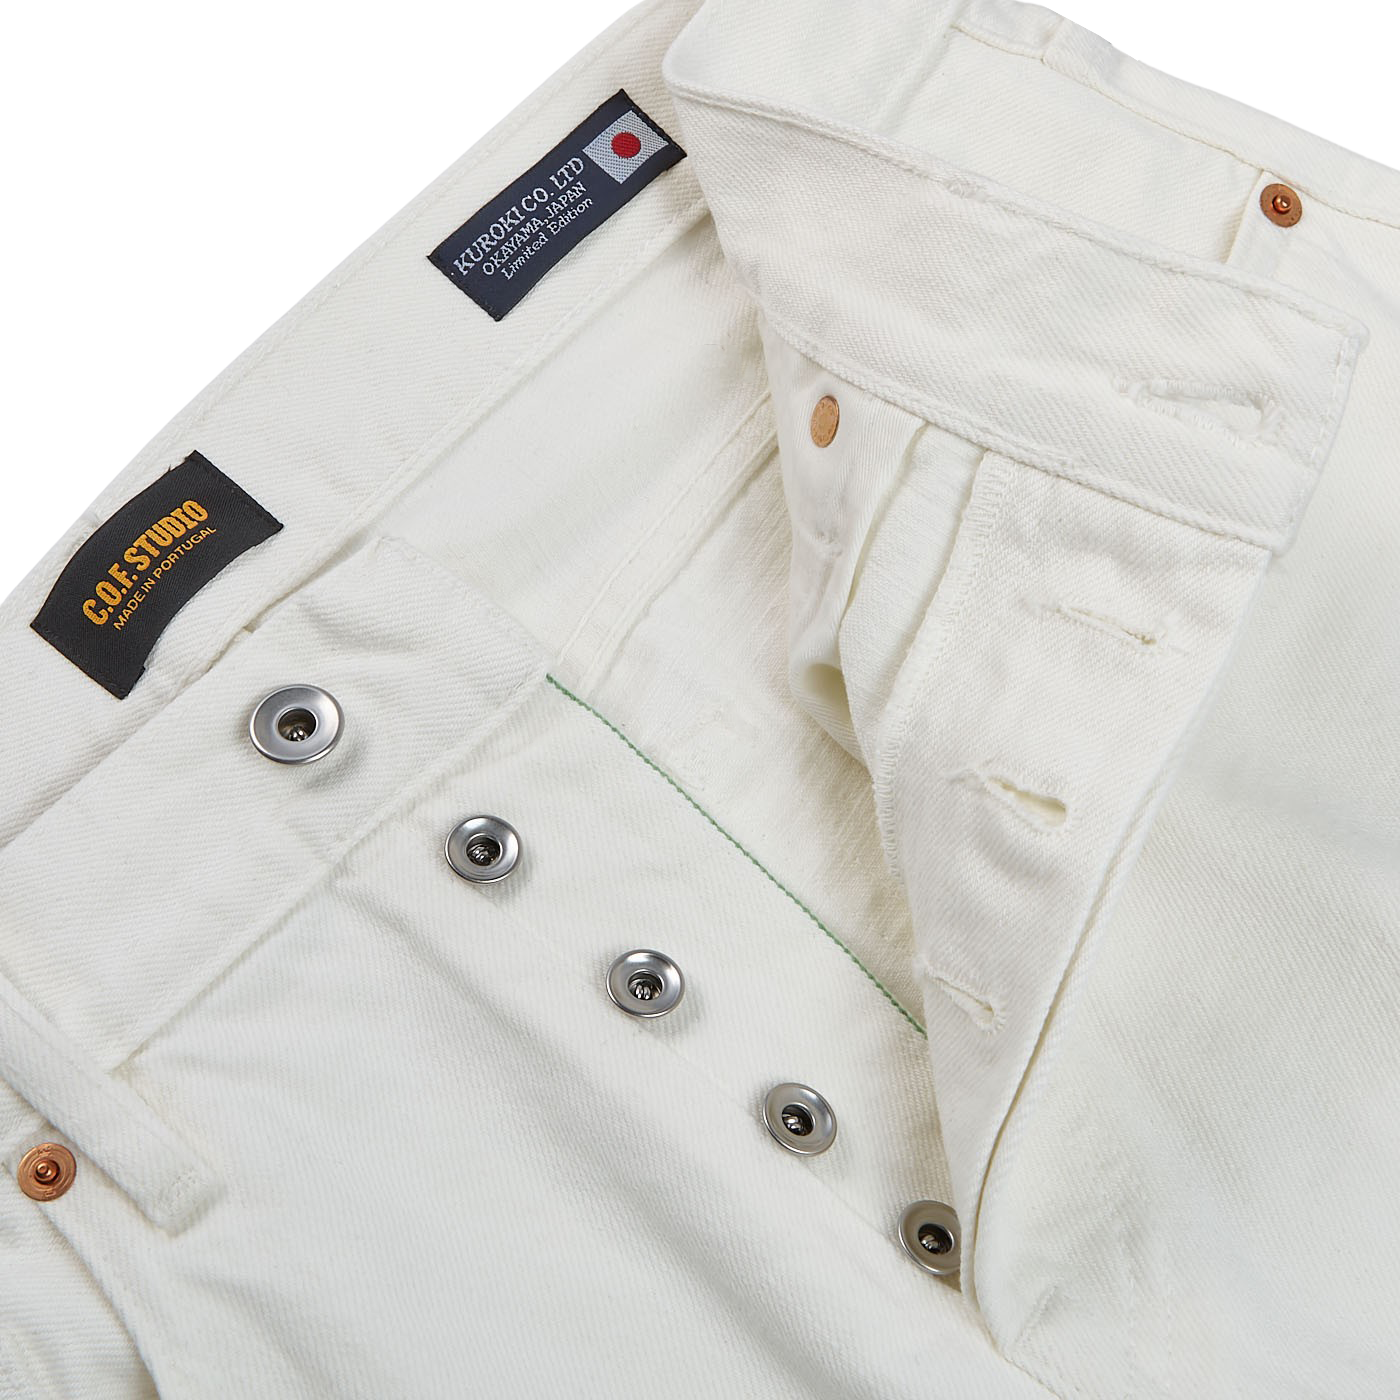 A pair of Ecru Stone Washed Kuroki Cotton M7 Jeans with buttons, organic denim, from C.O.F Studio.